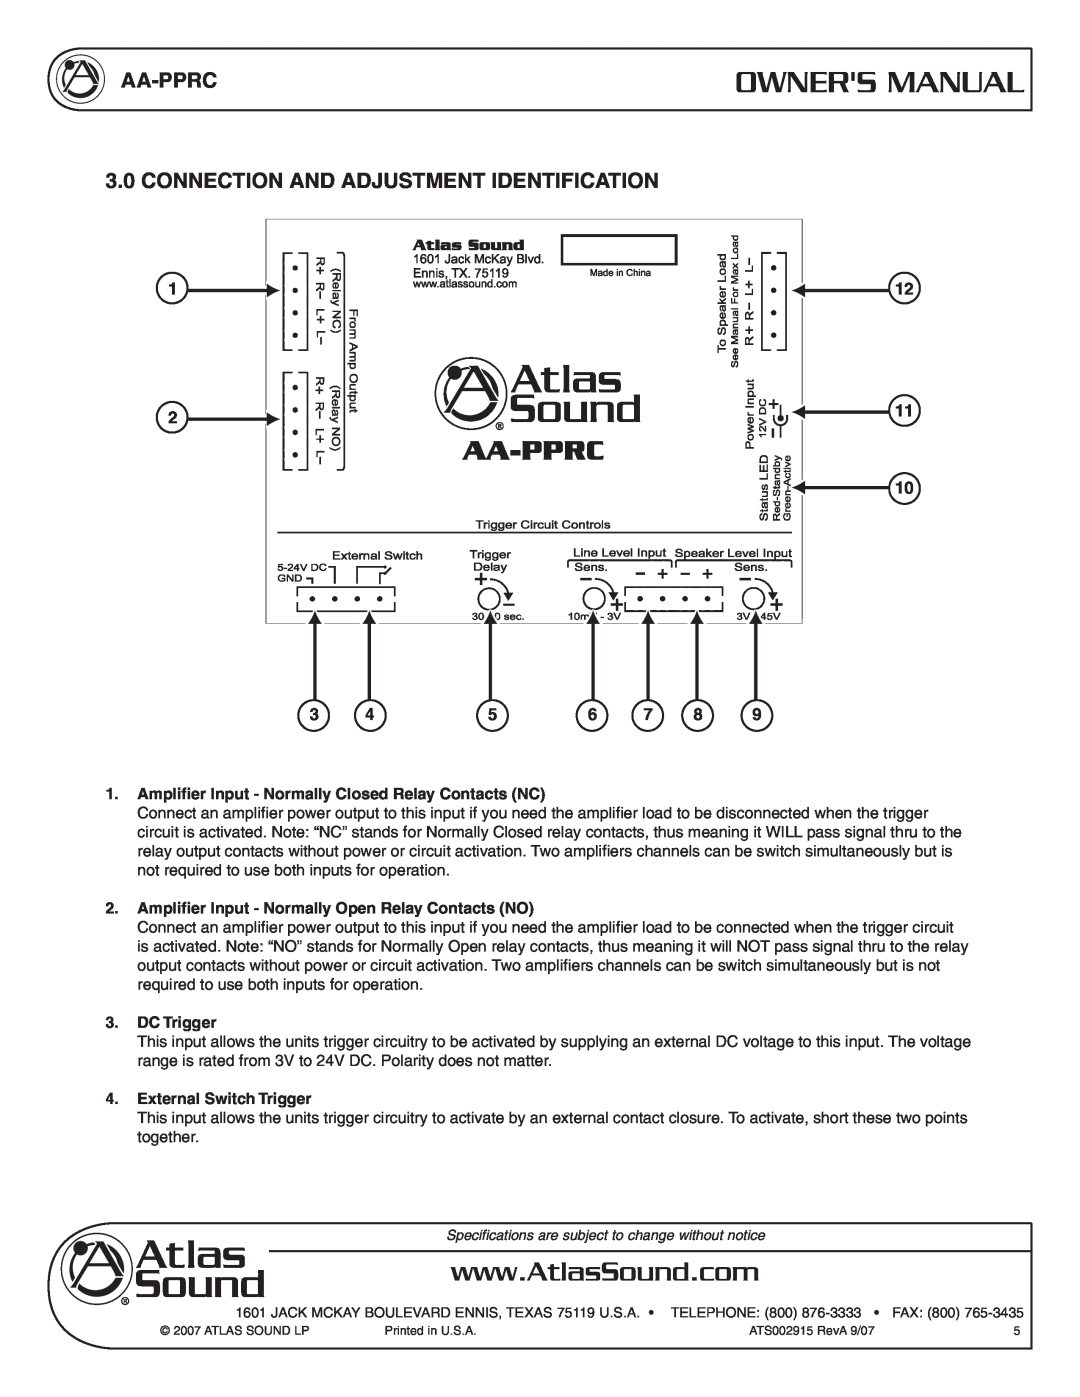 Atlas Sound AA-PPRC 3.0 CONNECTION AND ADJUSTMENT IDENTIFICATION, Amplifier Input - Normally Closed Relay Contacts NC 